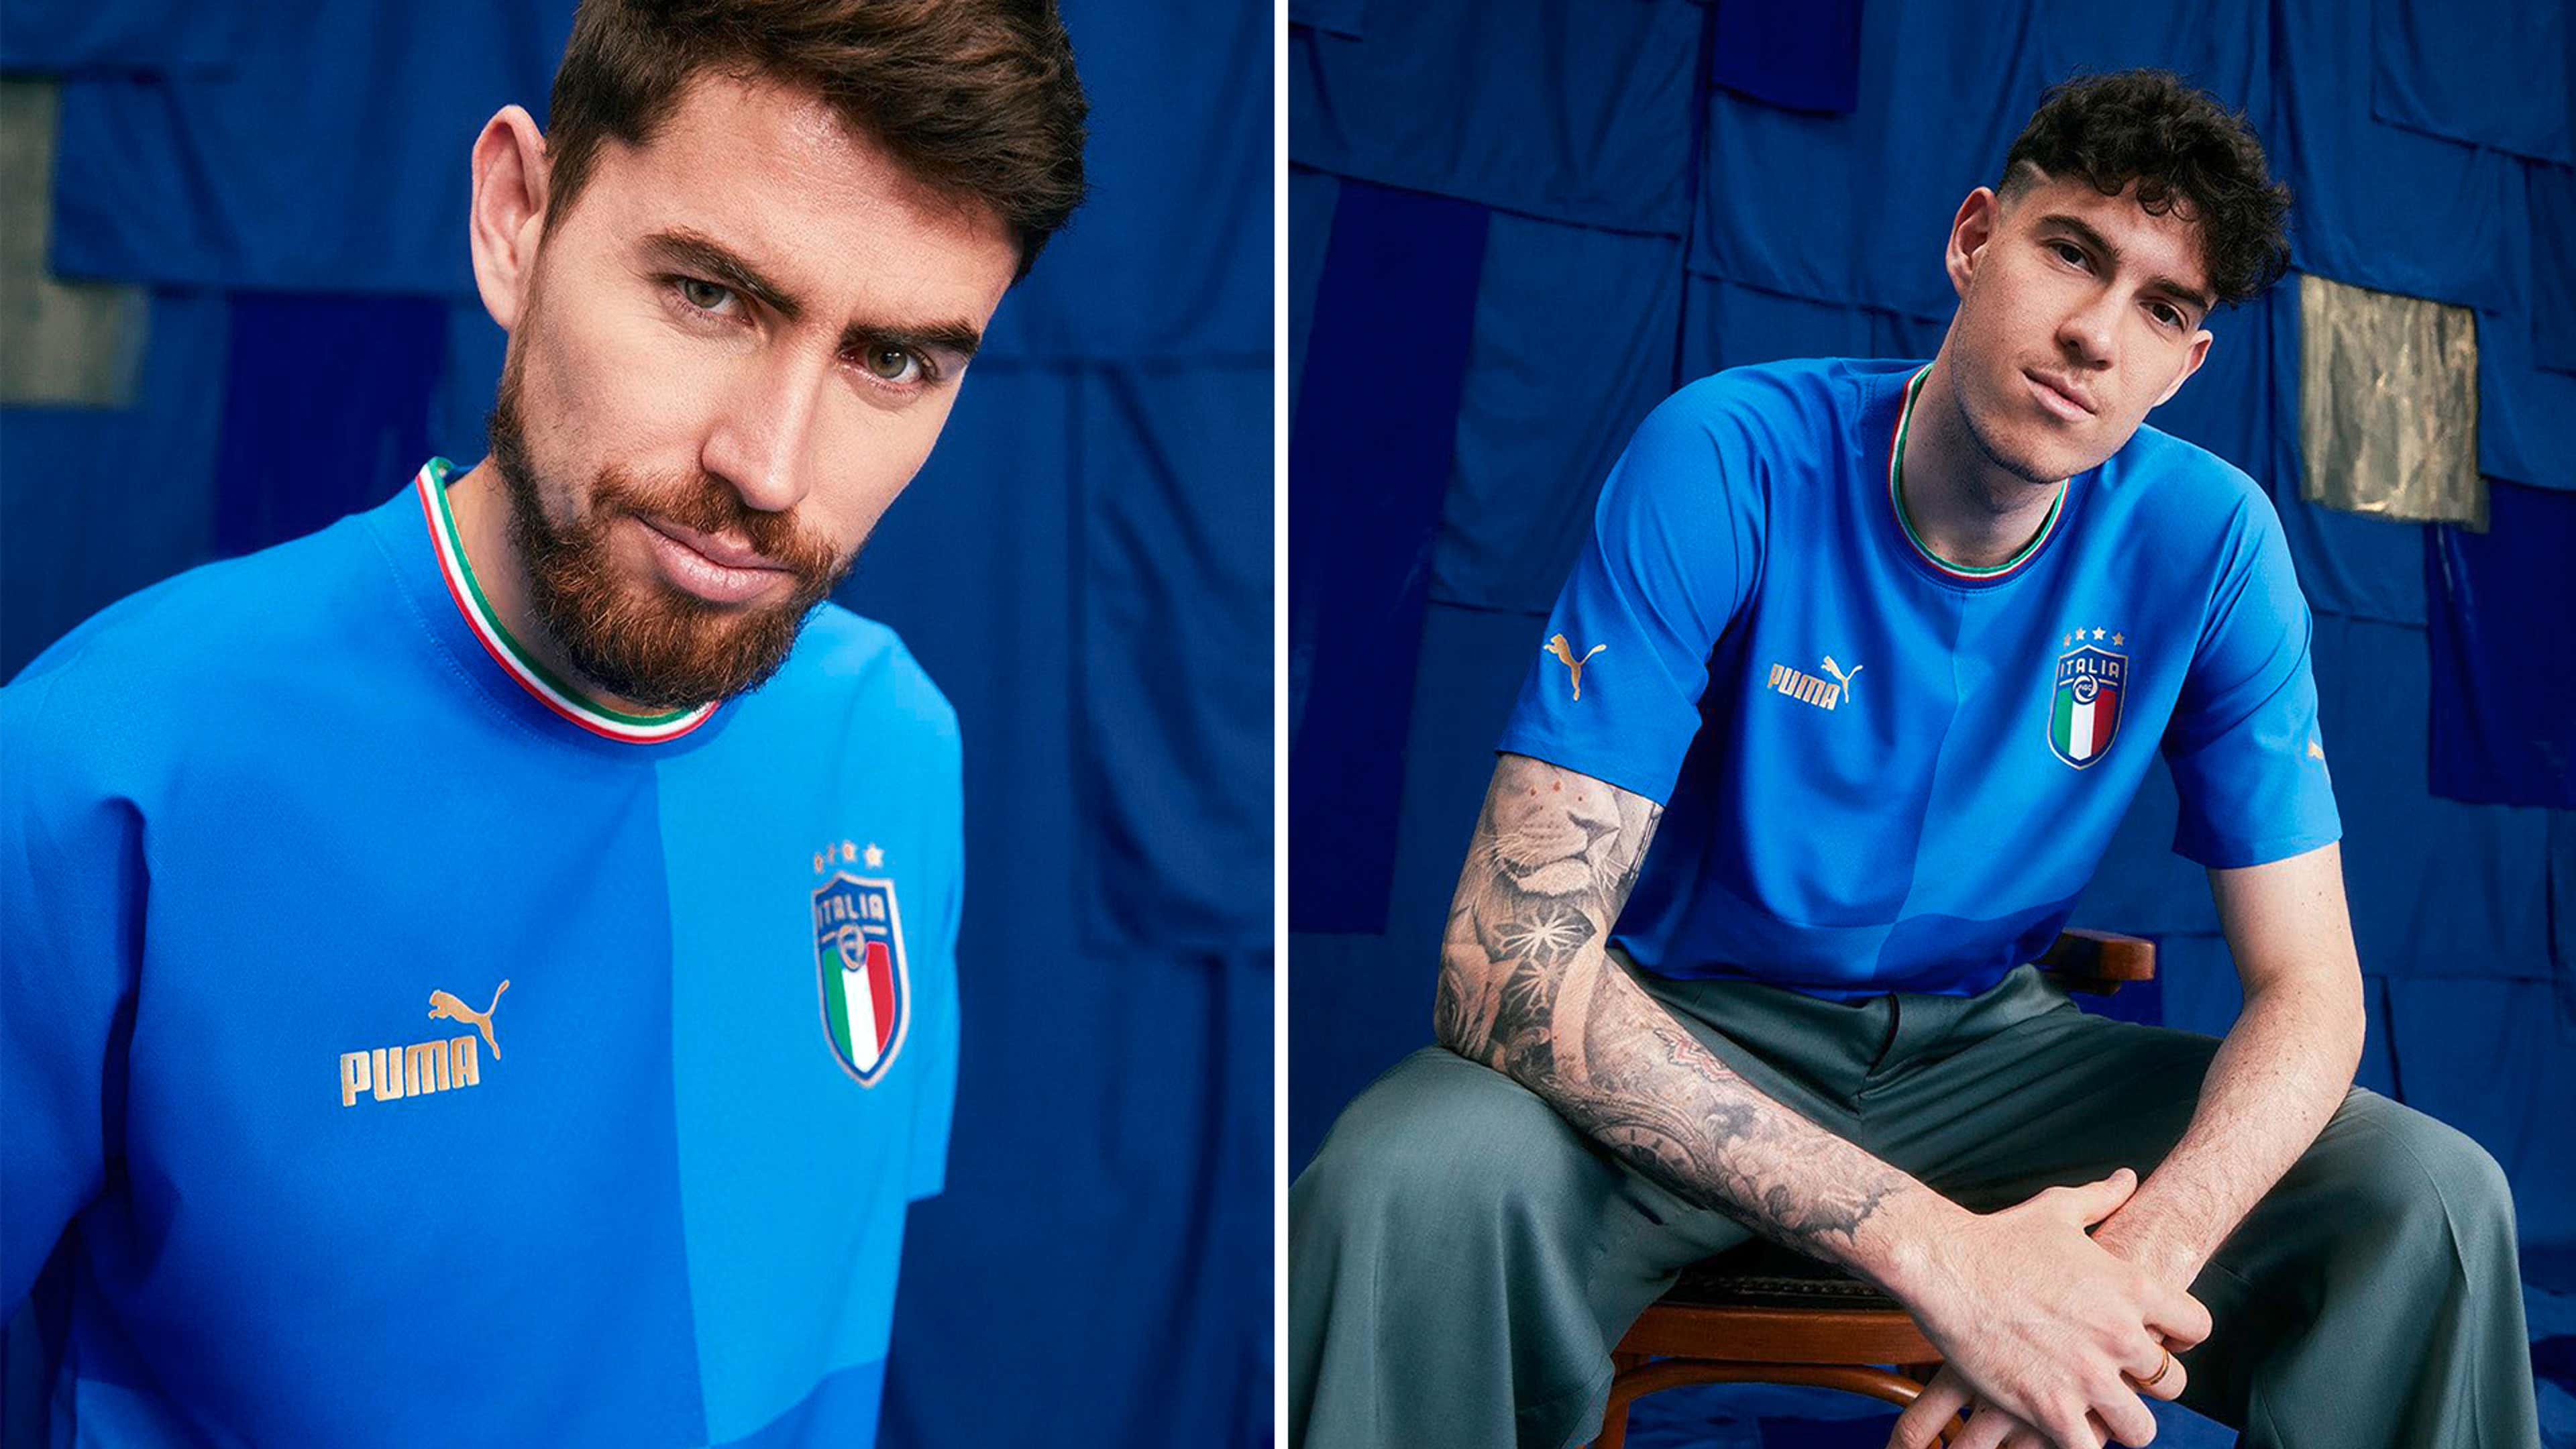 Italy 2022 new home kit: Price, how to buy & inspiration explained